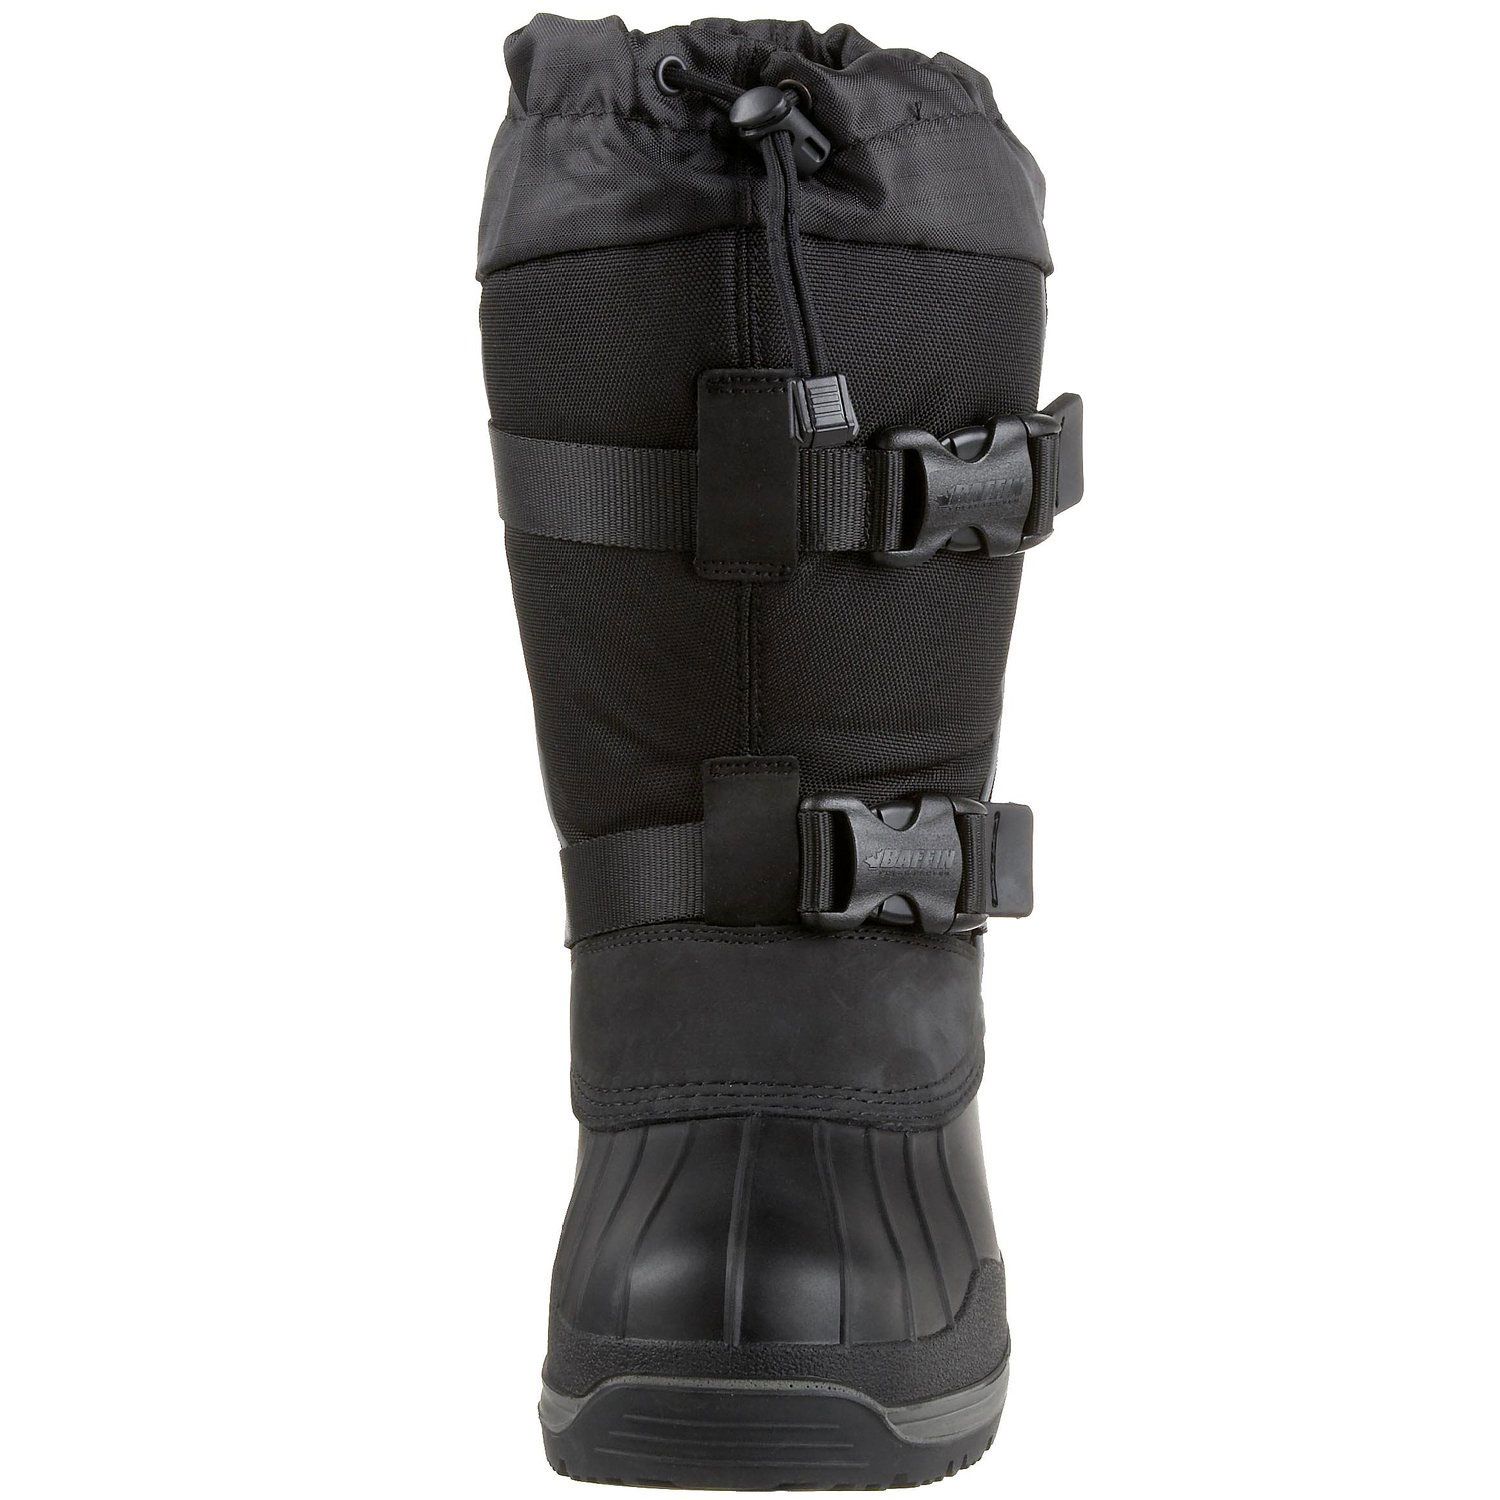 baffin impact boots canada